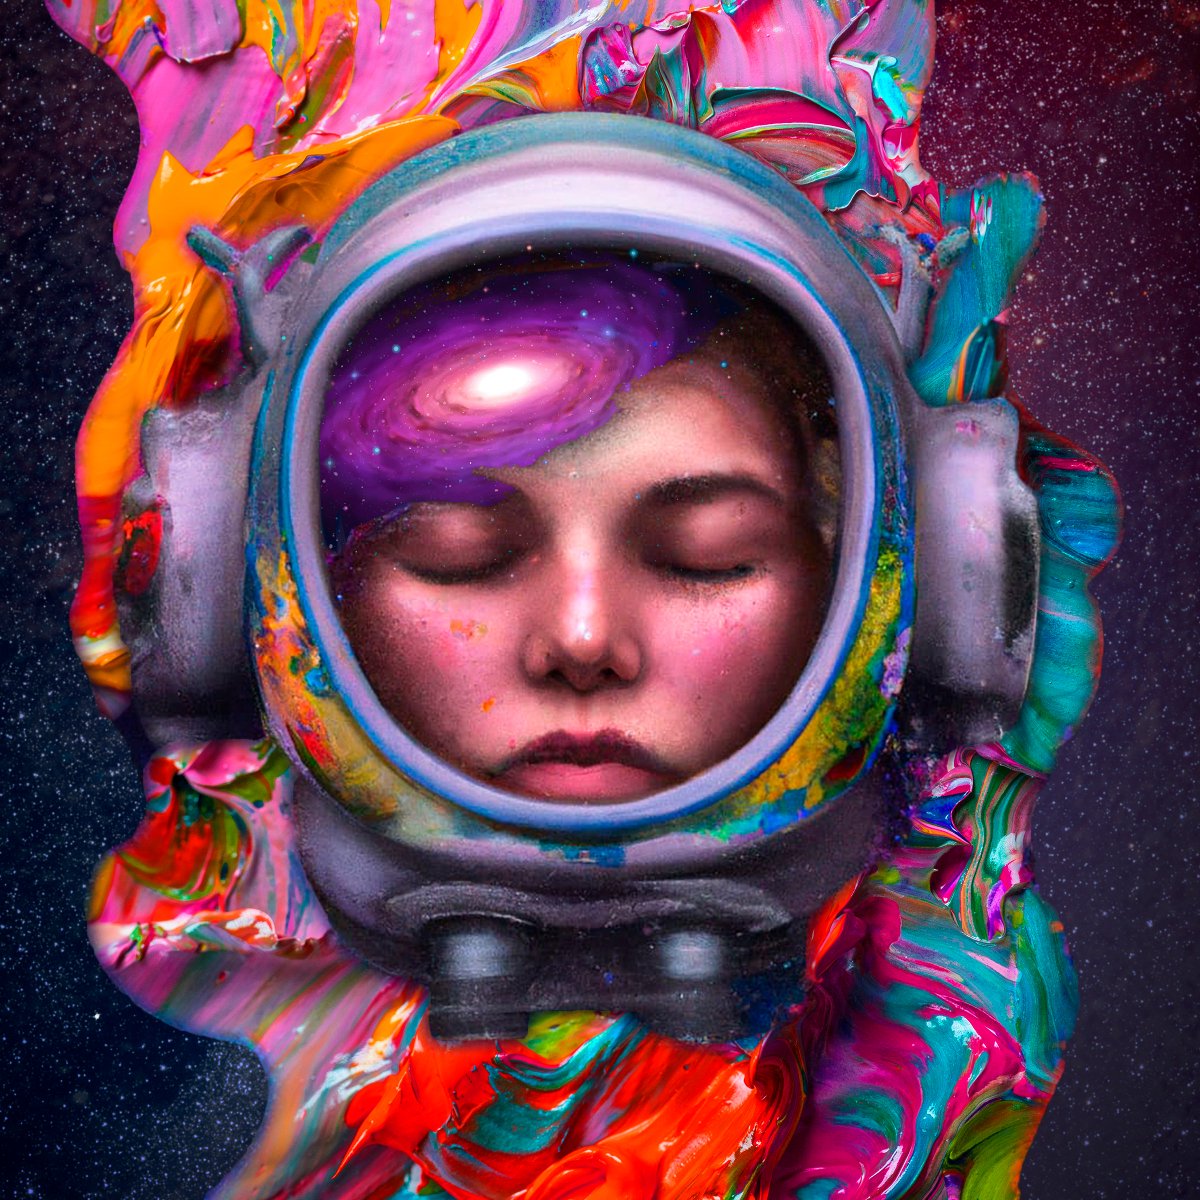 Dream a little dream of the future from the Magical World (By Javier Ortiz) collection has been listed for sale.
'Escape to the stars little boy, navigate through infinite space... keep dreaming'
#NFTEcuador #NFTart #NFTcommunity #Future #Stars #Astronaut #FantasyNFT